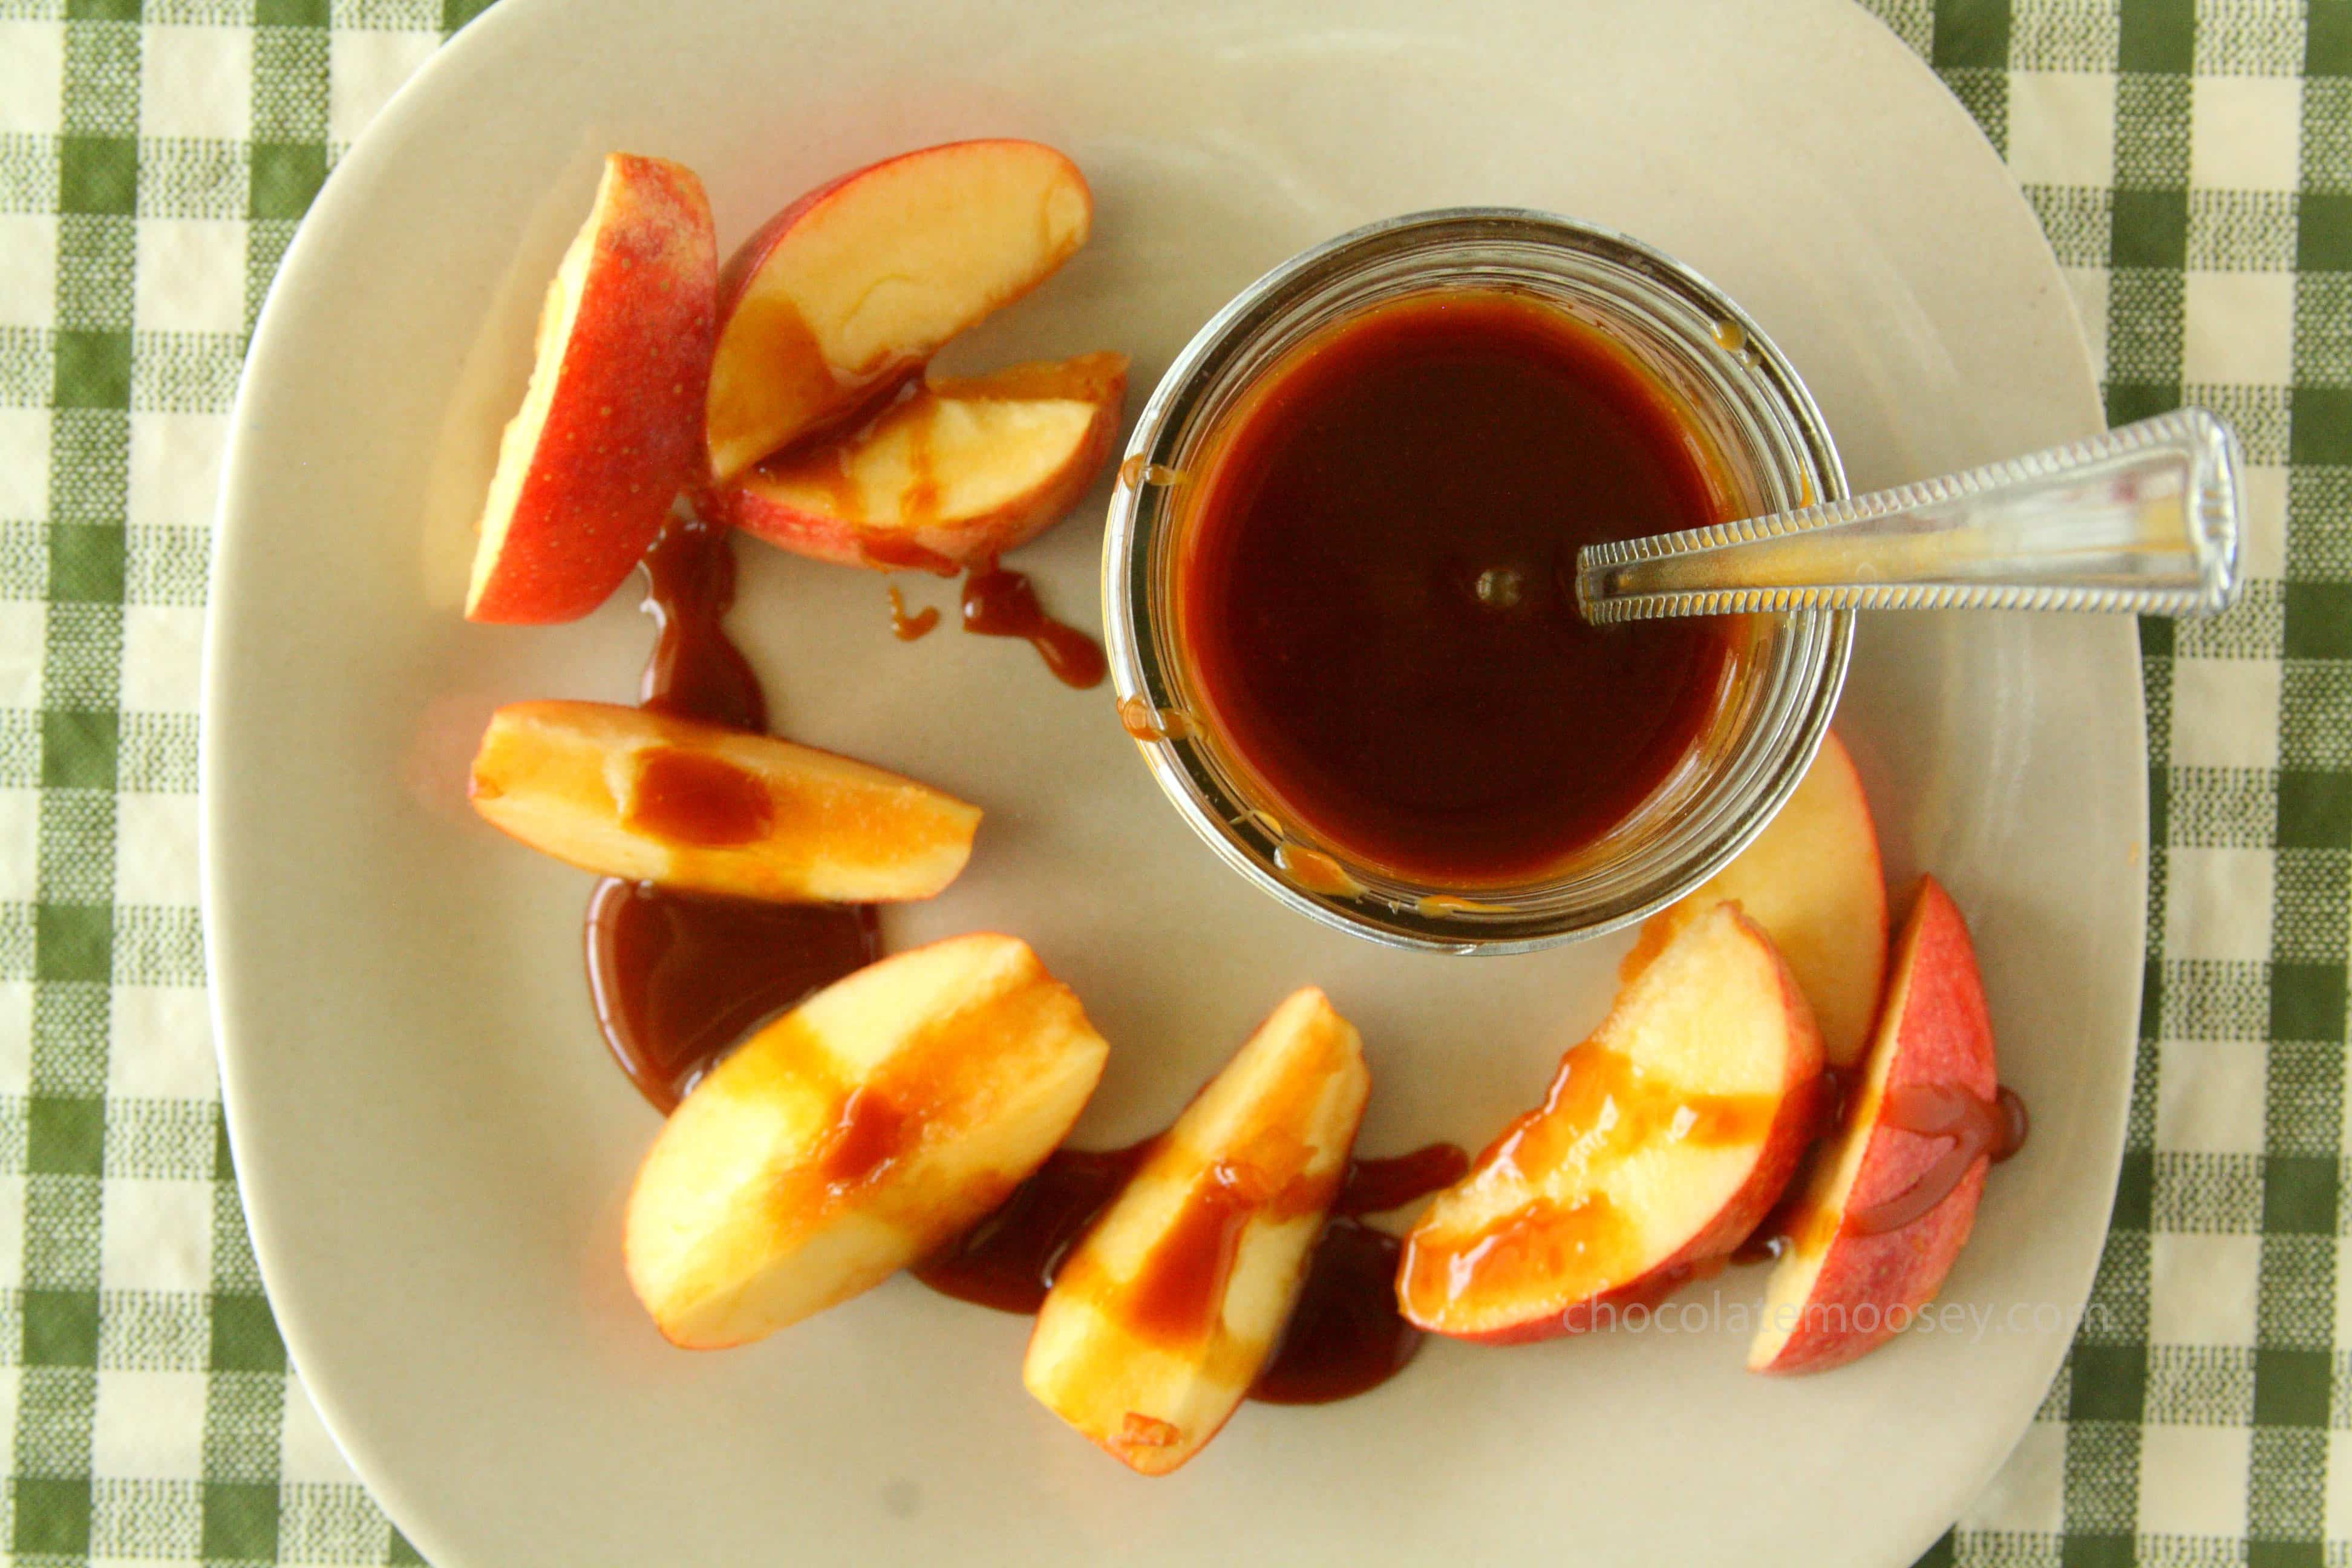 Jar of caramel sauce on plate with apple slices